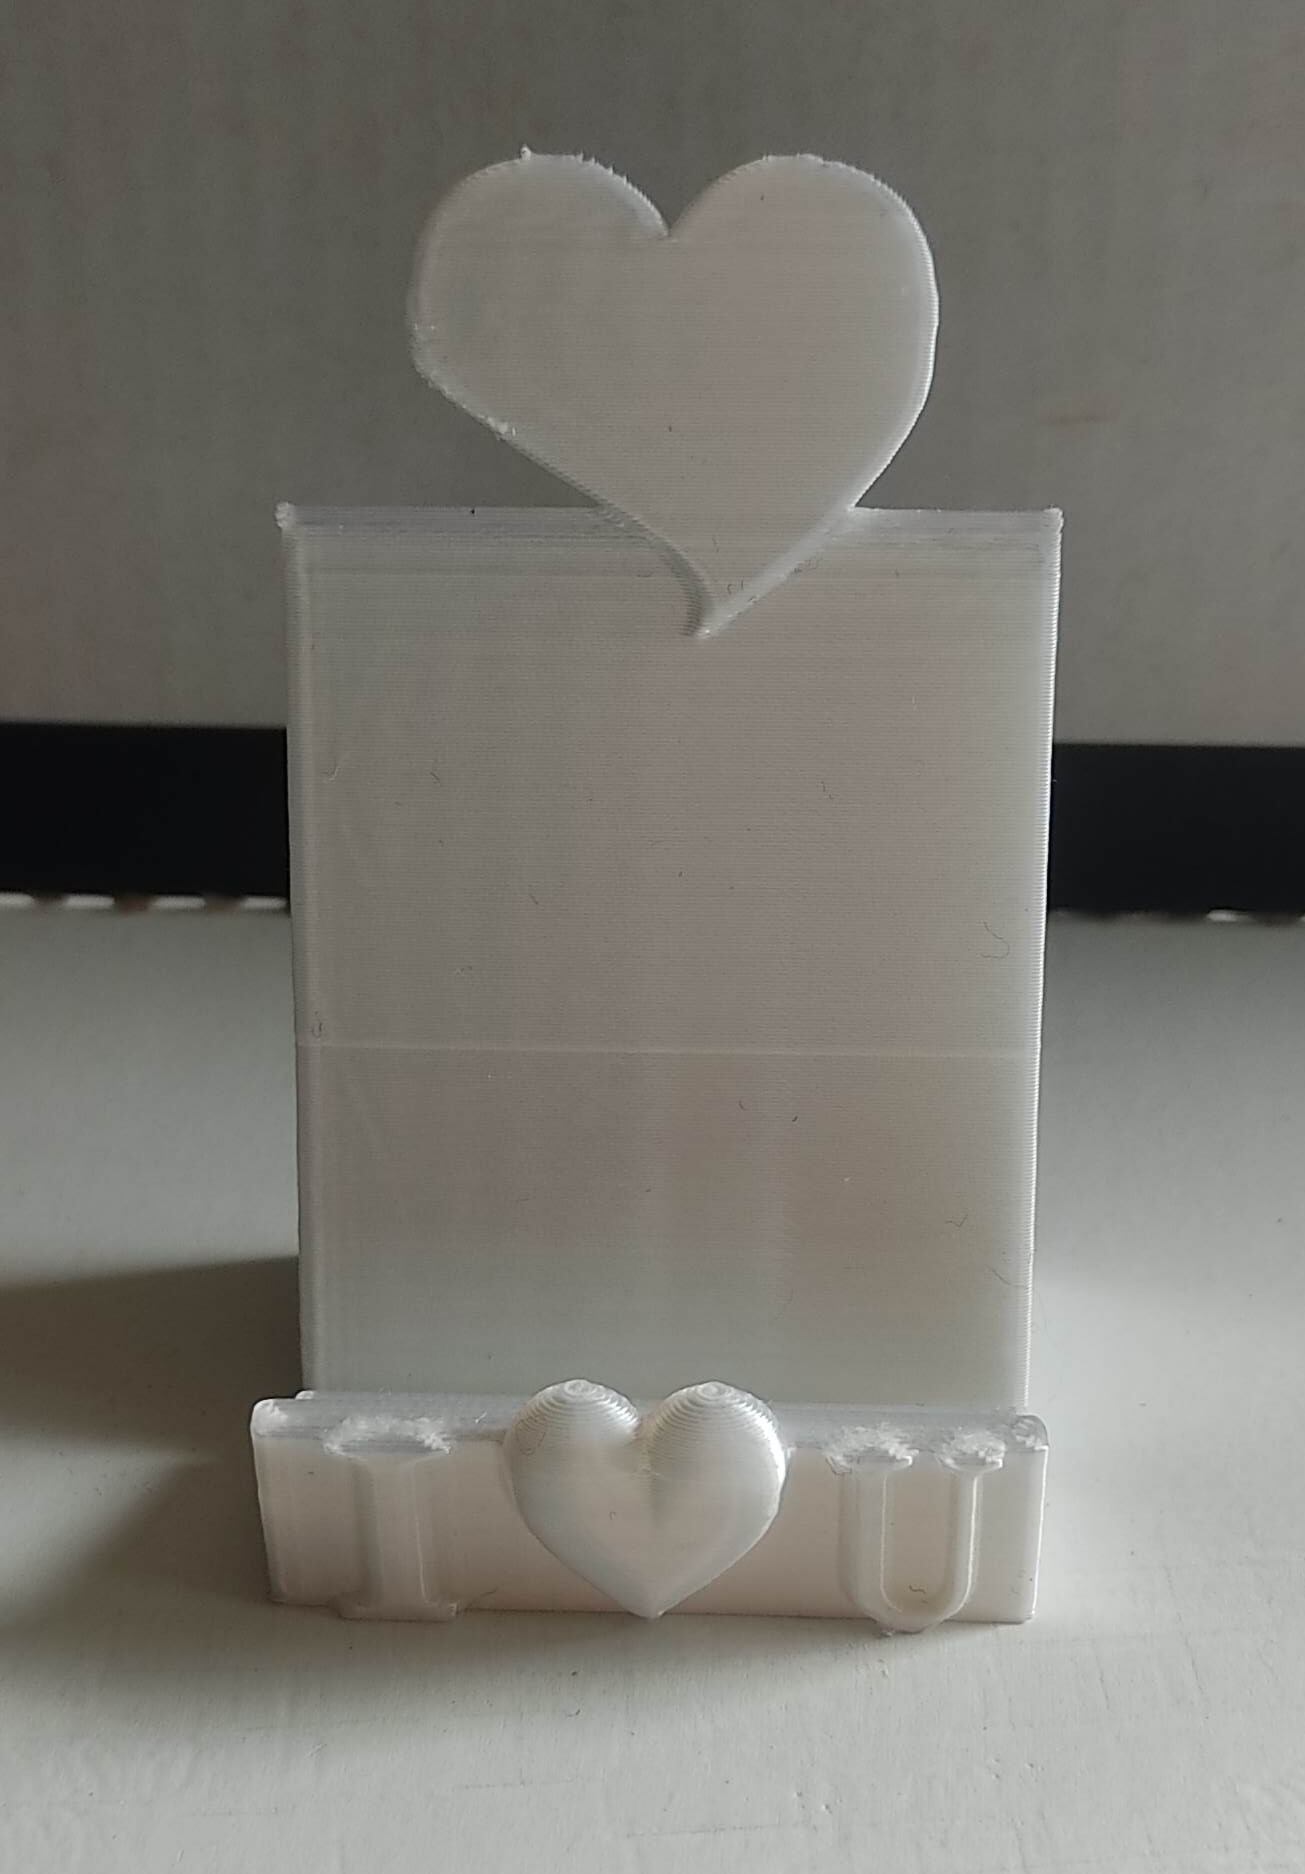 Smartphone holder with heart for love